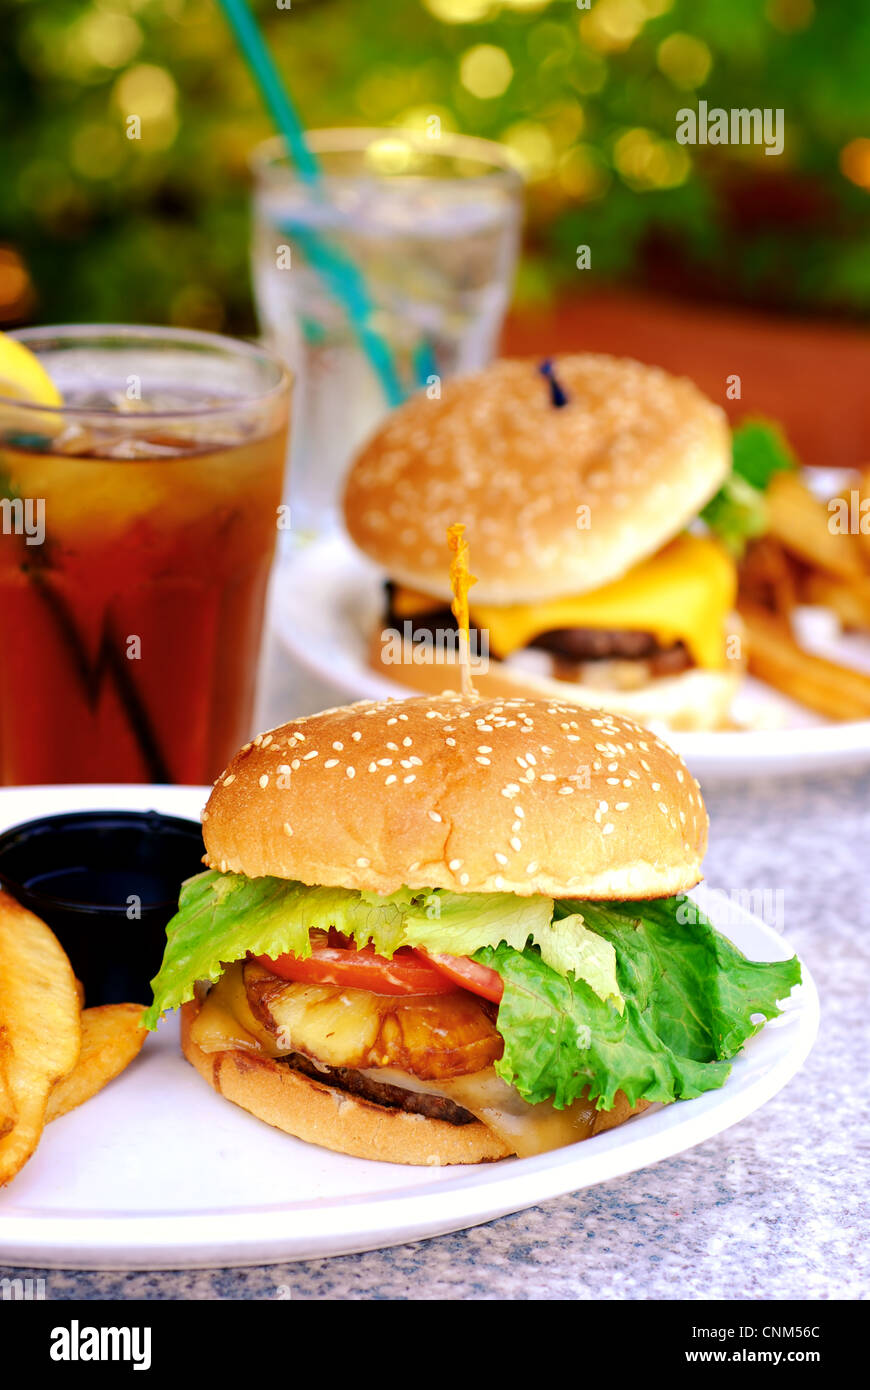 Teriyaki burger with large French fries at an outdoor restaurant Stock Photo